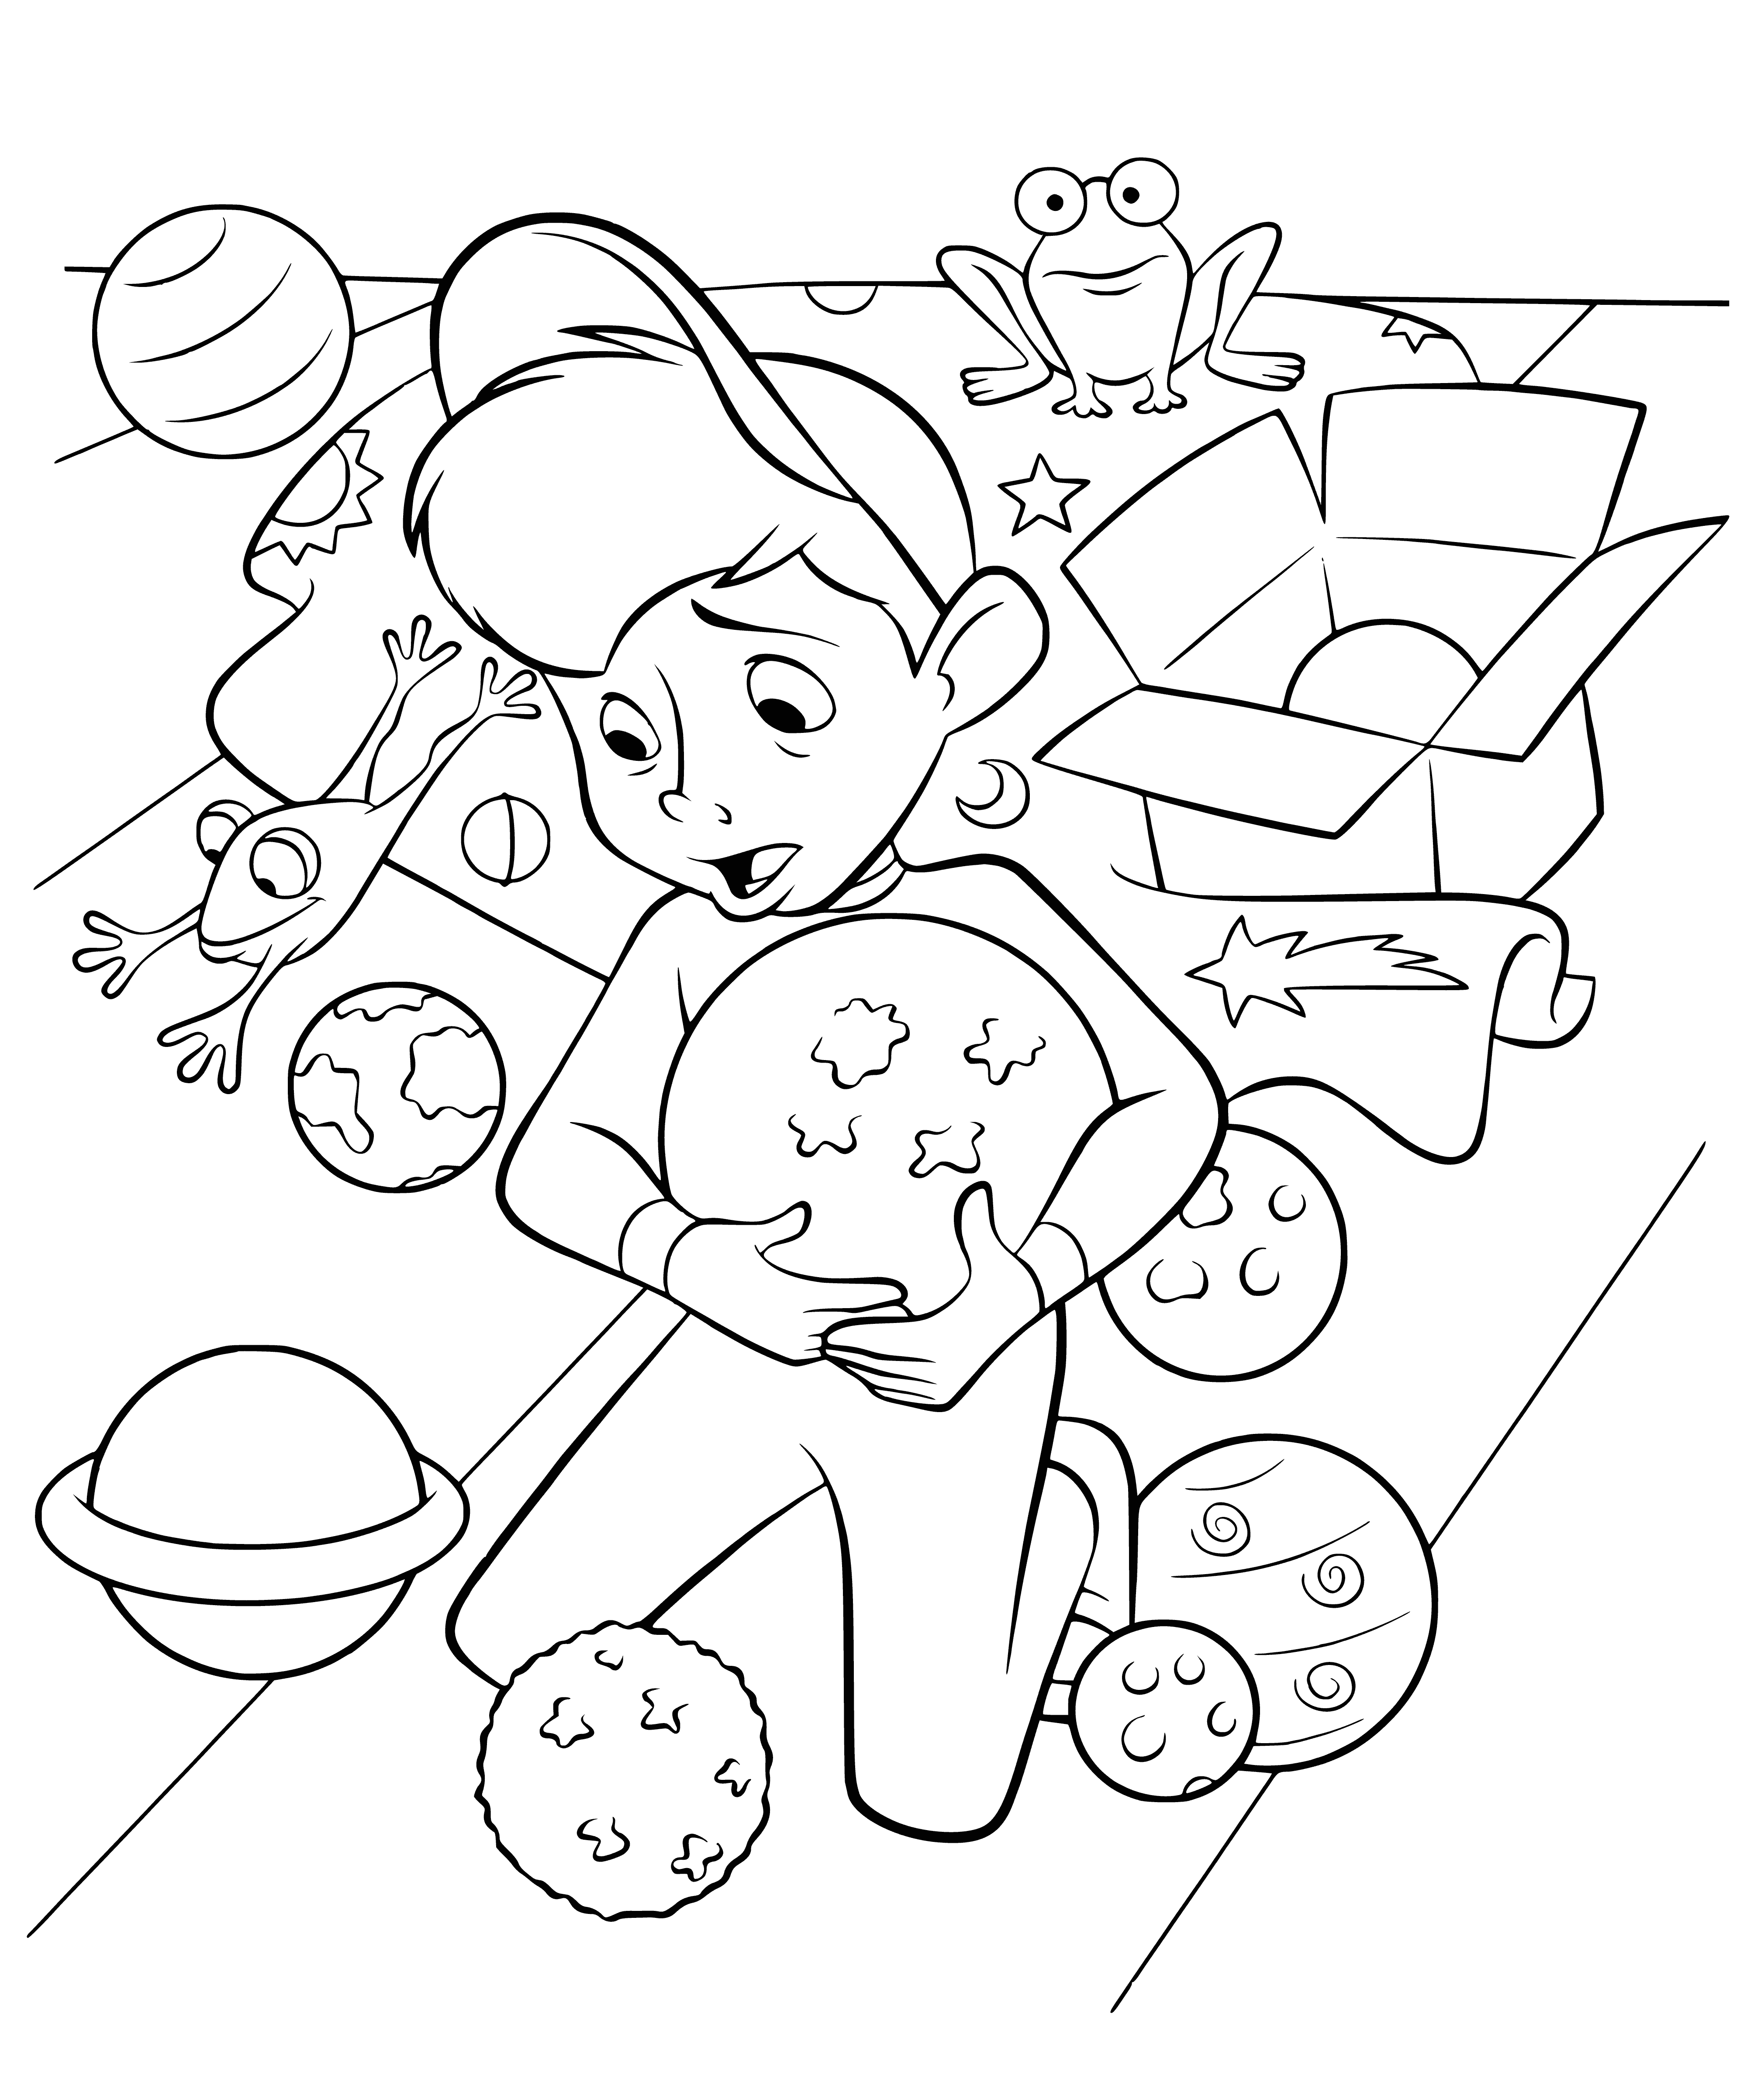 coloring page: 3 frogs hug on lily pads w/ planet & 2 moons in bg: 2 have eyes closed, 3rd holds other 2 in tender embrace. #bfffrogs